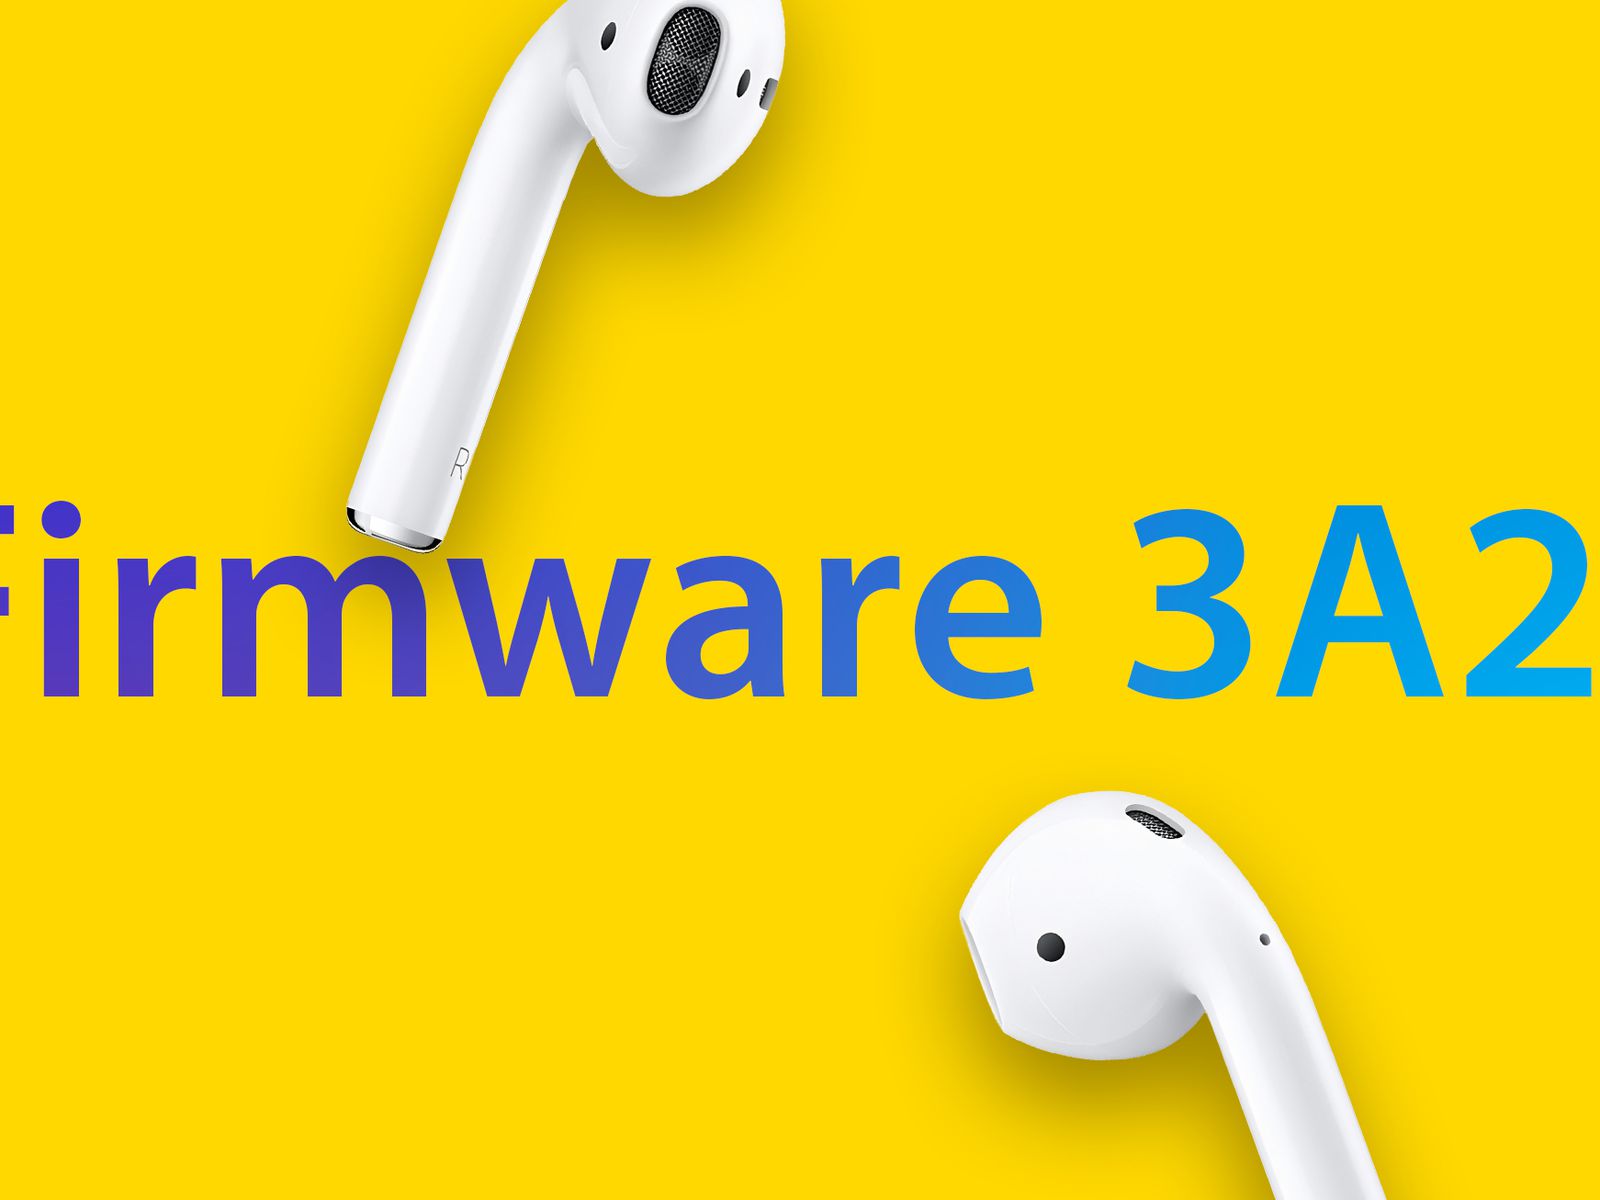 New AirPods Pro 2 firmware has been released